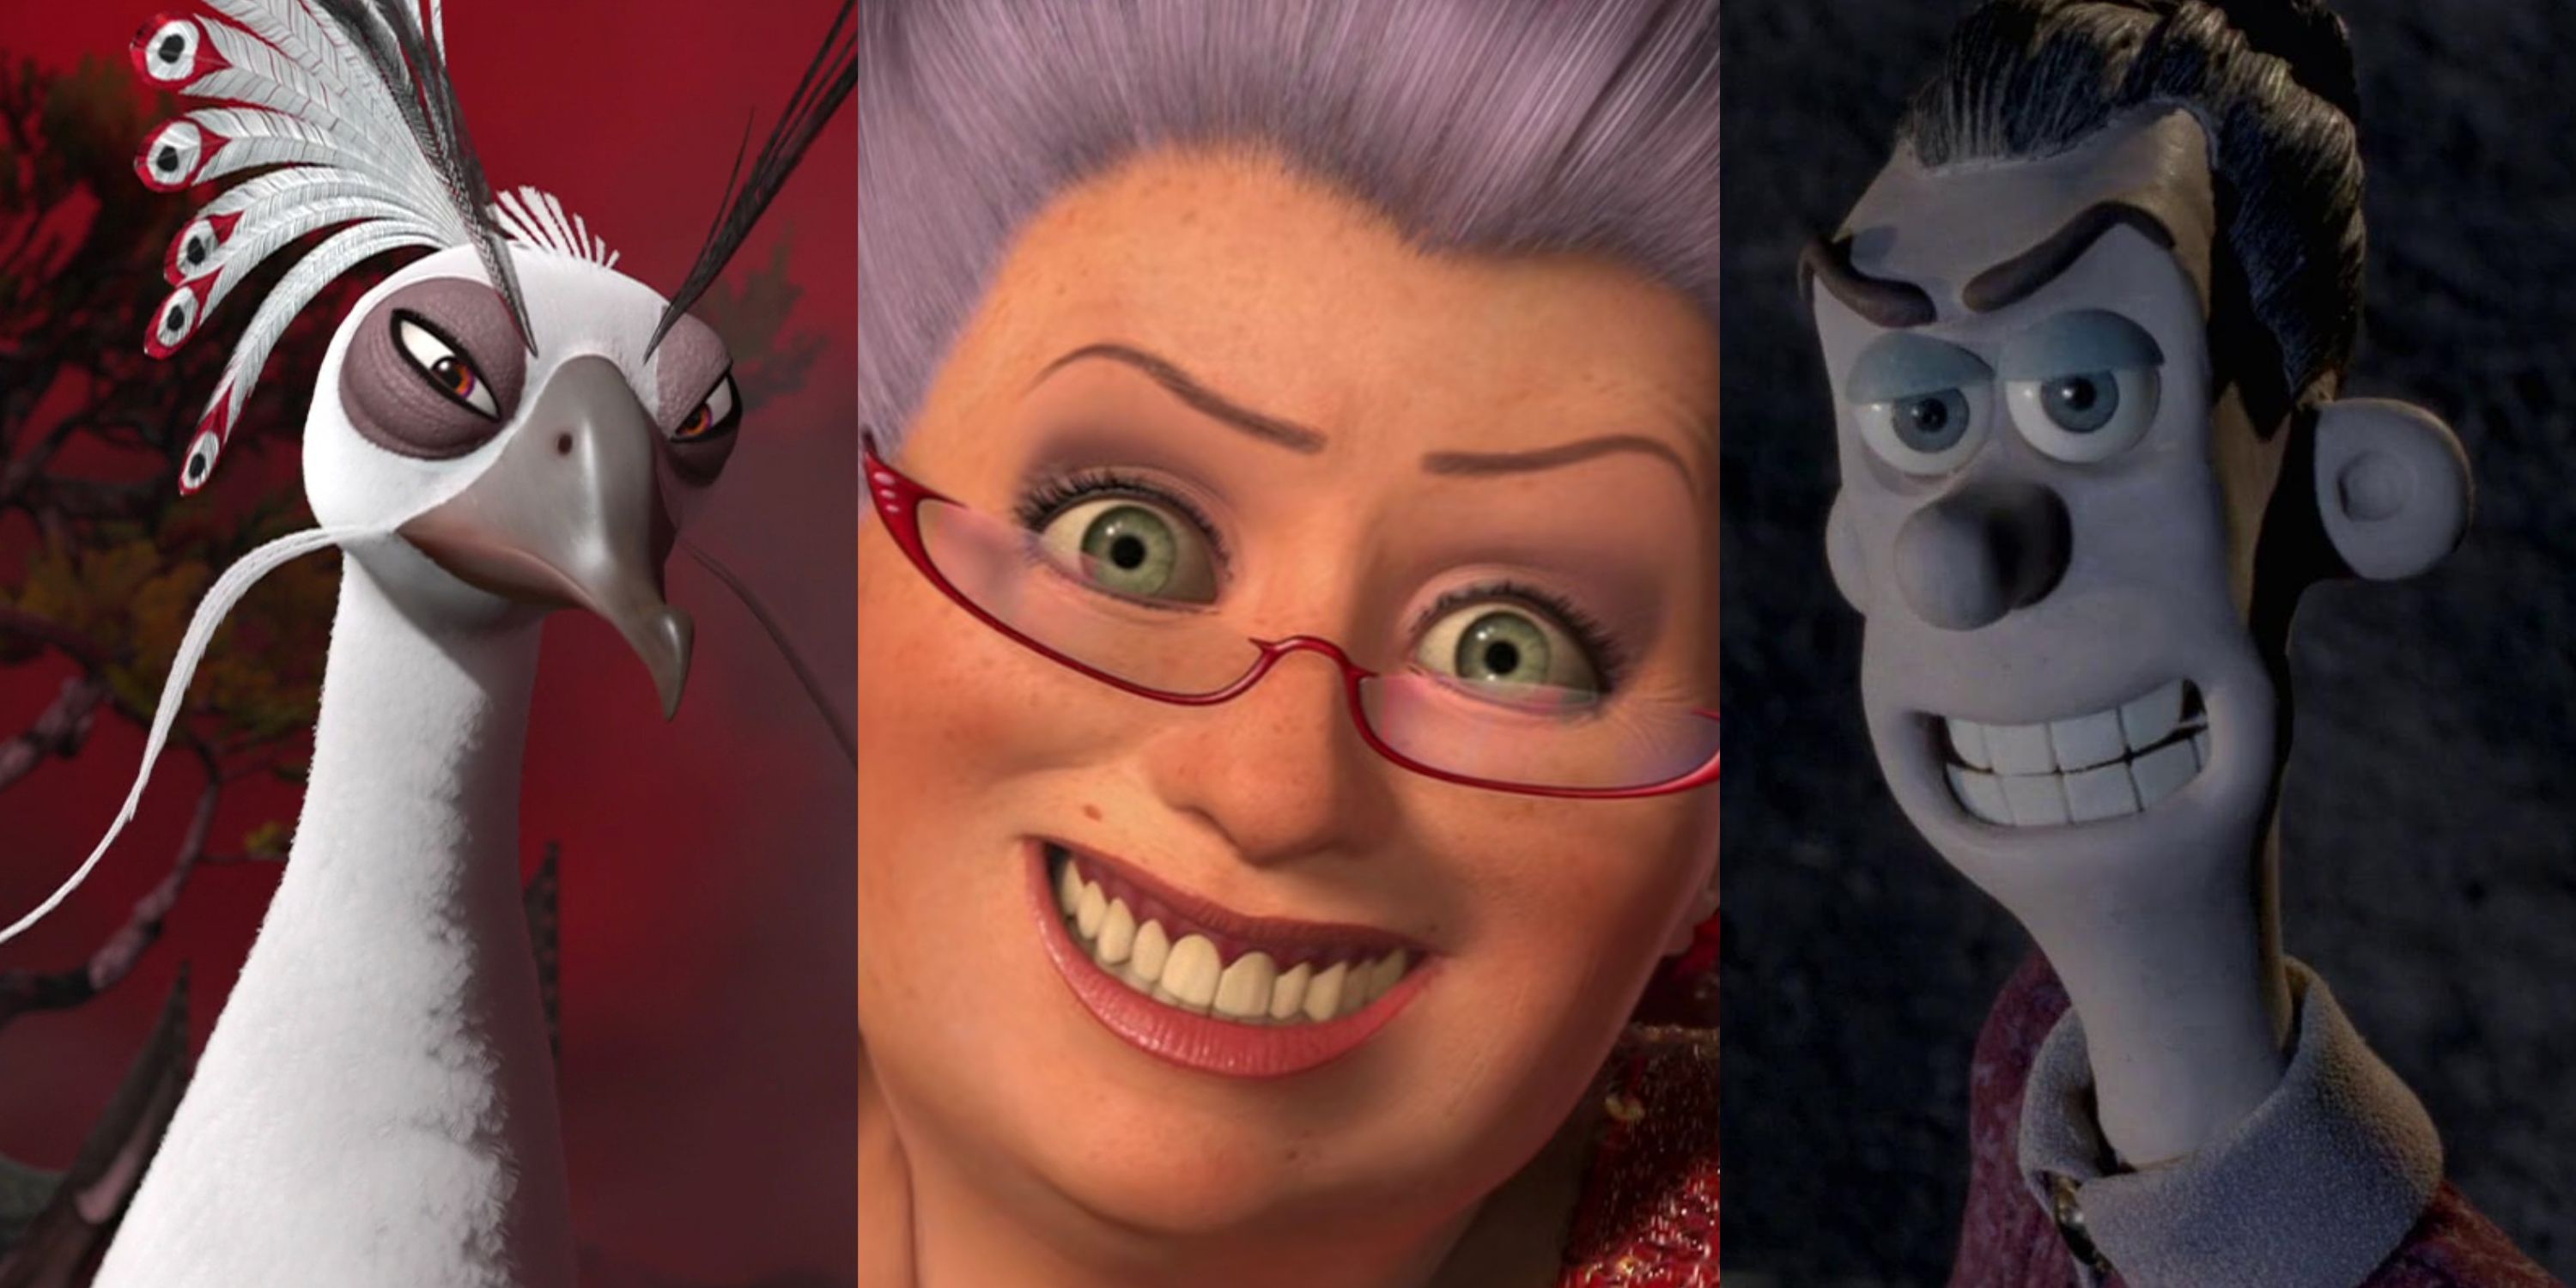 Split image of Shen, Fairy Godmother, and Mrs. Tweedy from DreamWorks movies